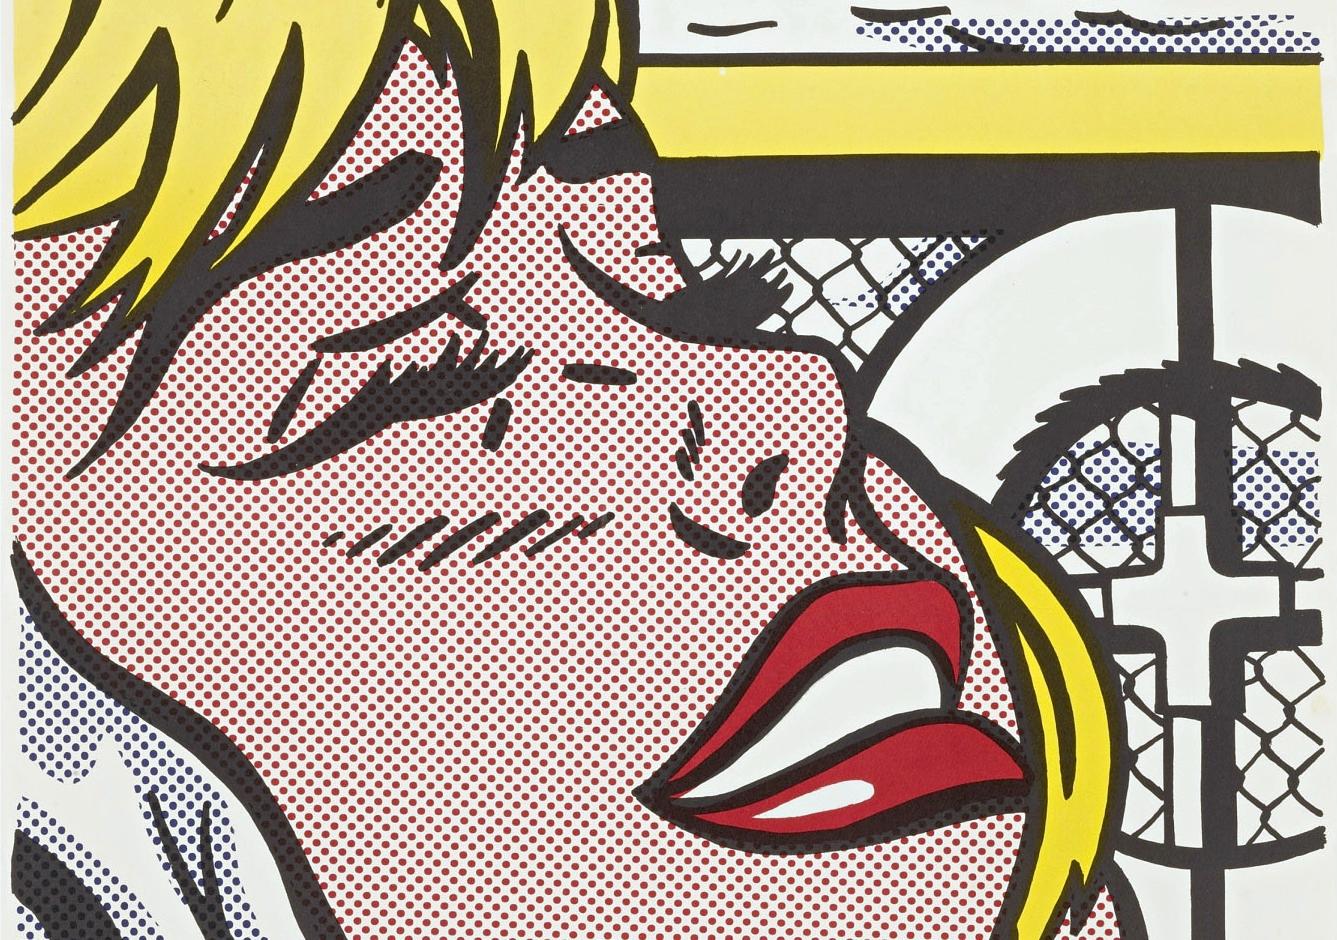 Shipboard Girl is an offset lithograph printed in colours on wove paper, 1965, signed in pencil, from the edition of unknown size.

This beautiful print is hand-signed by Roy Lichtenstein (New York, 1923 - New York, 1997) on the lower right